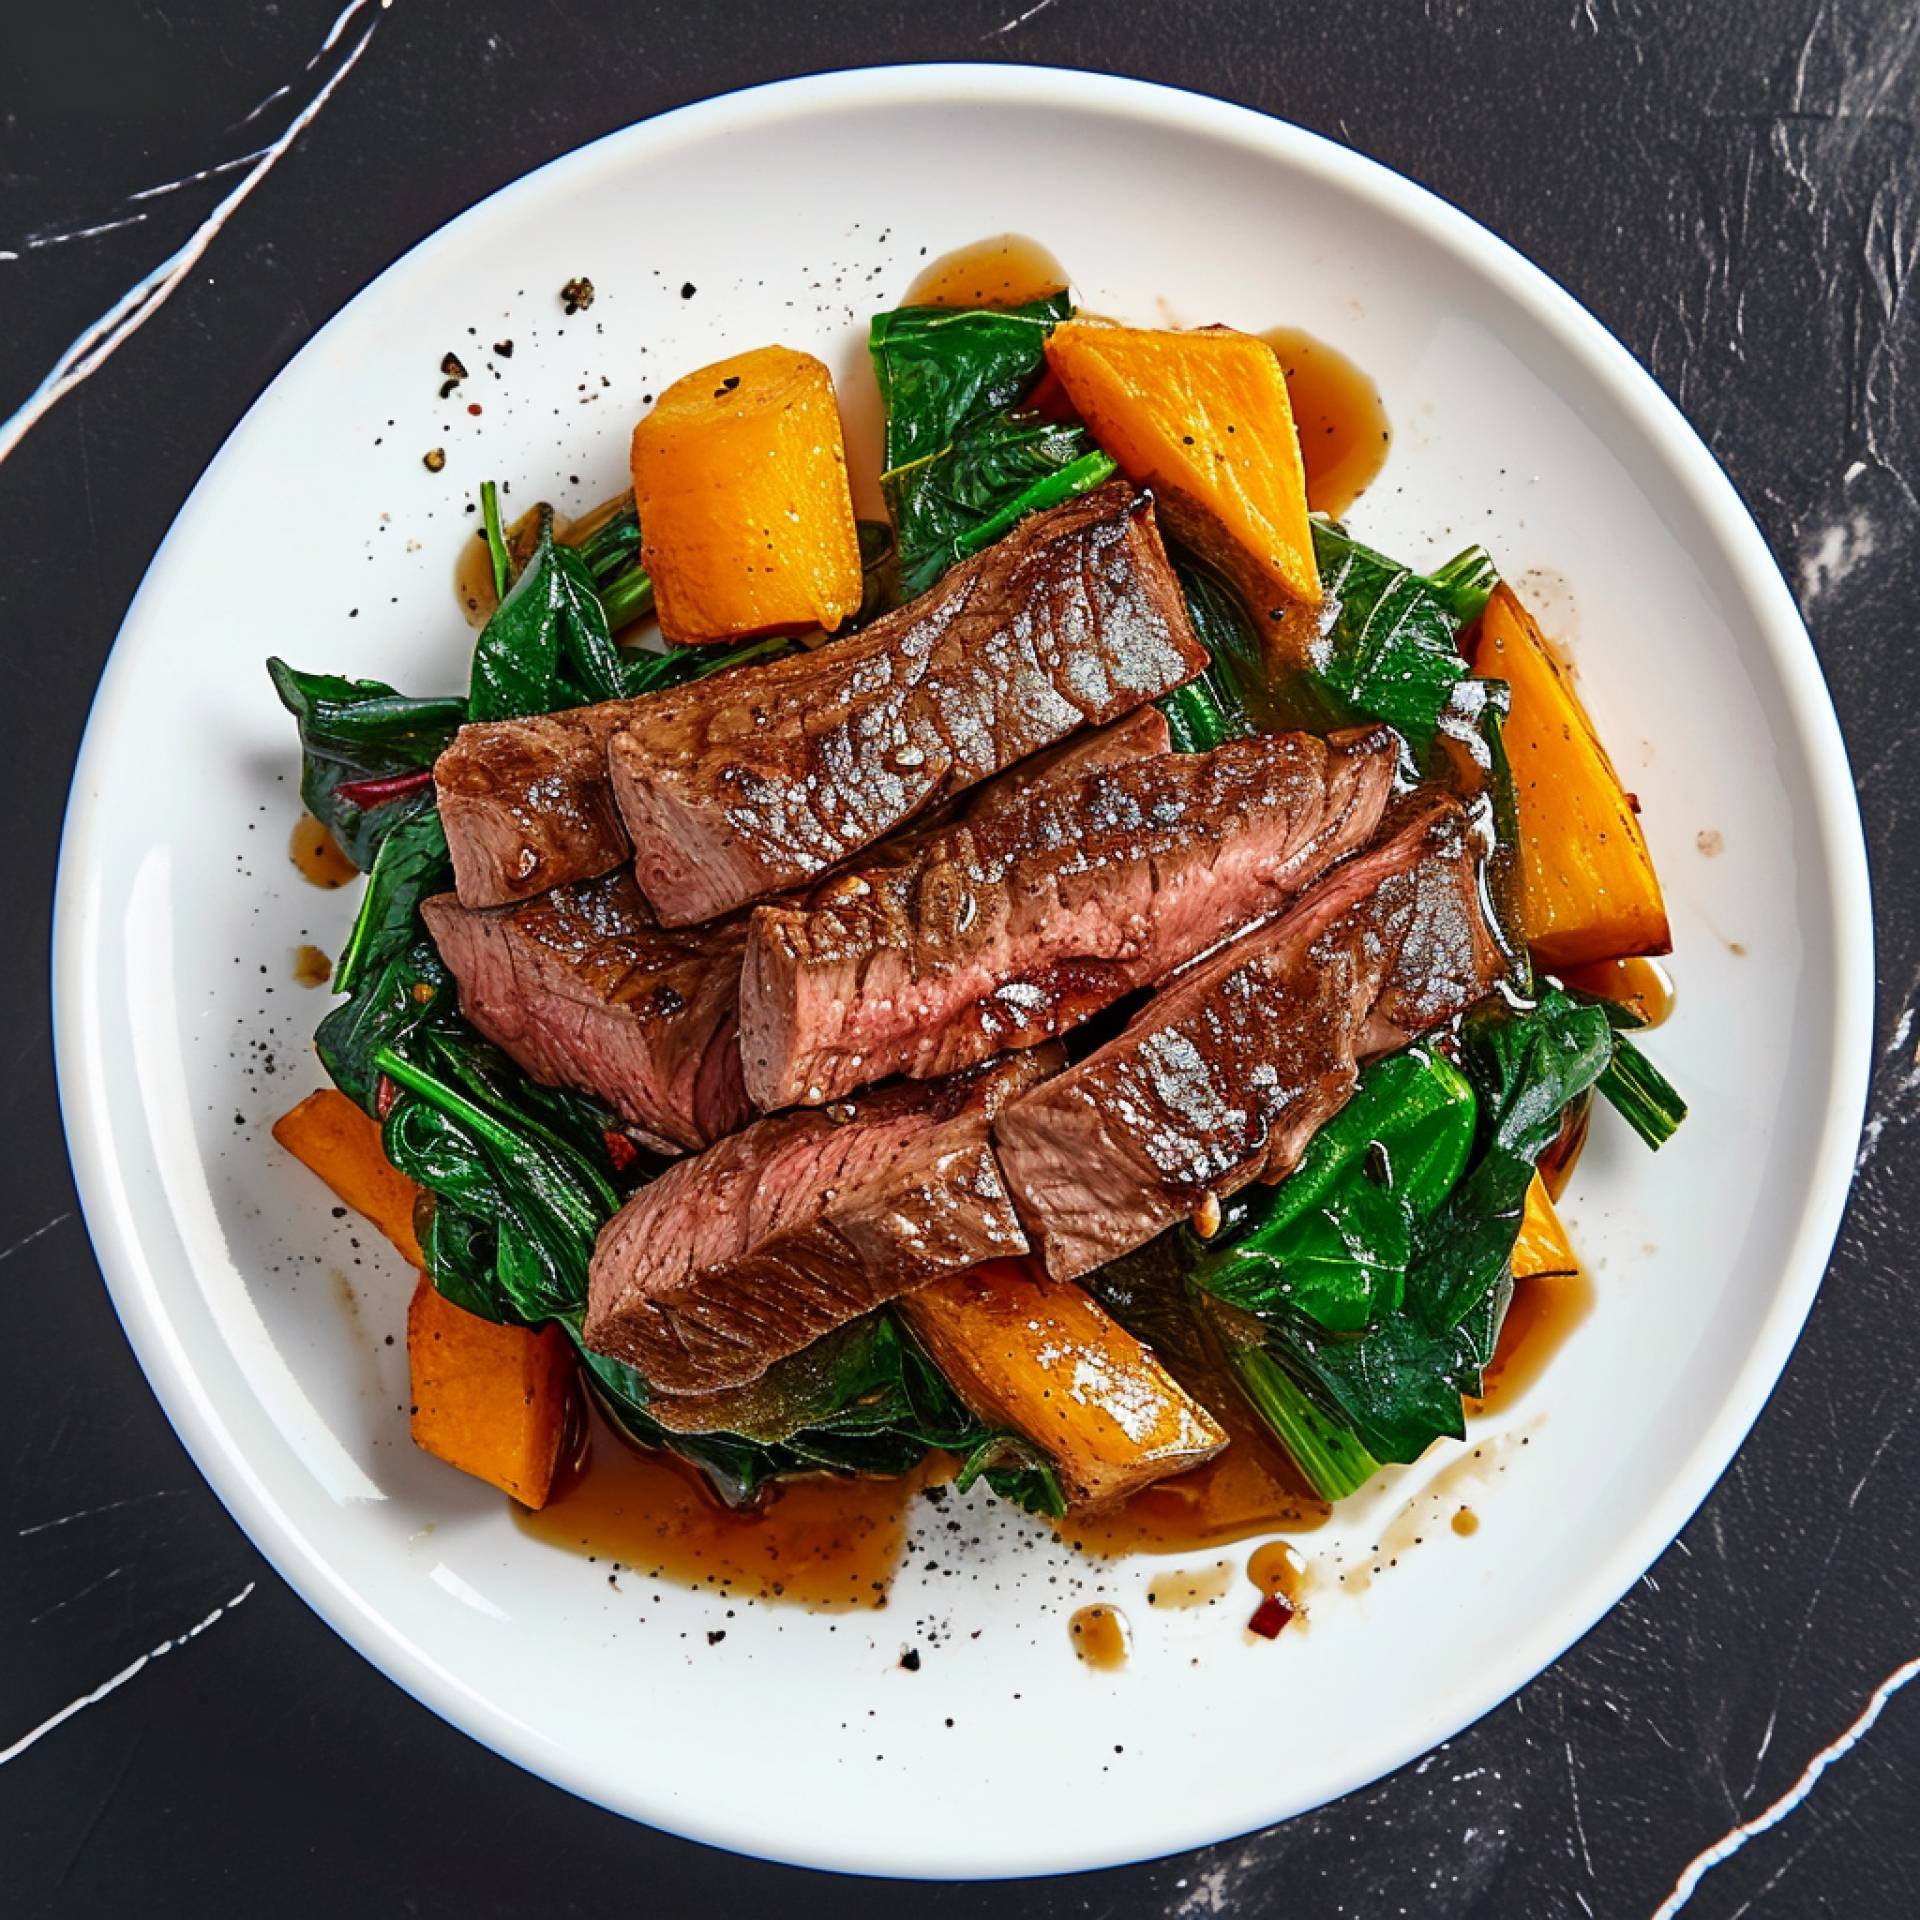 Balsamic Glazed Steak with Rosemary-Infused Sweet Potatoes